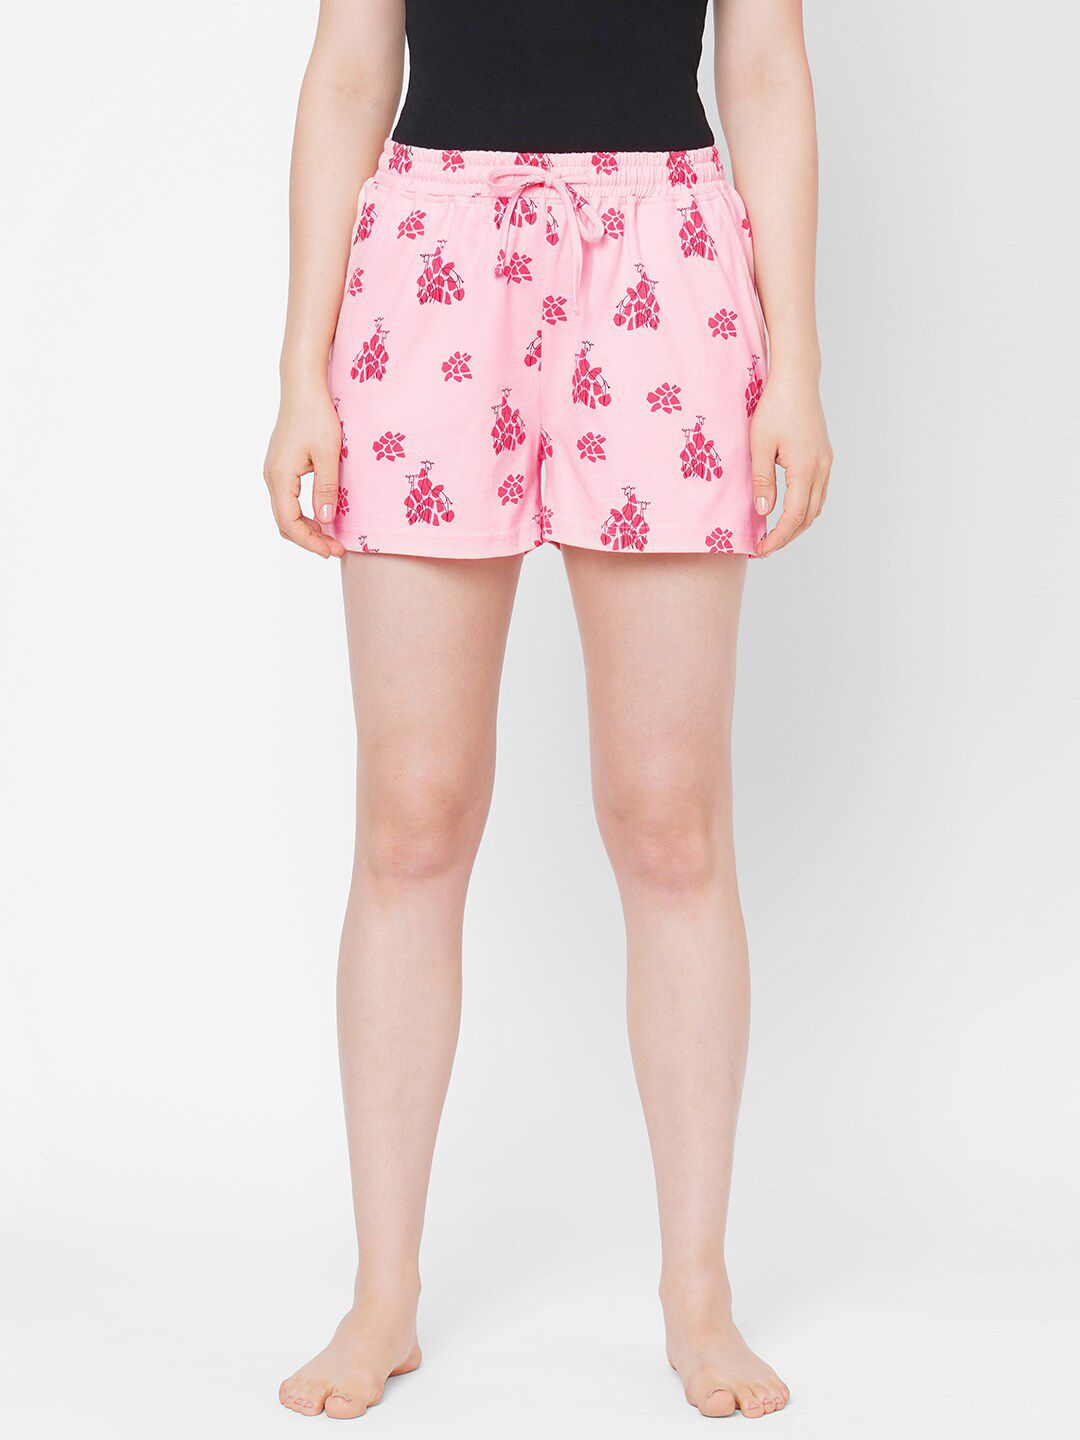 Mystere Paris Women Pink Floral Printed Shorts Price in India